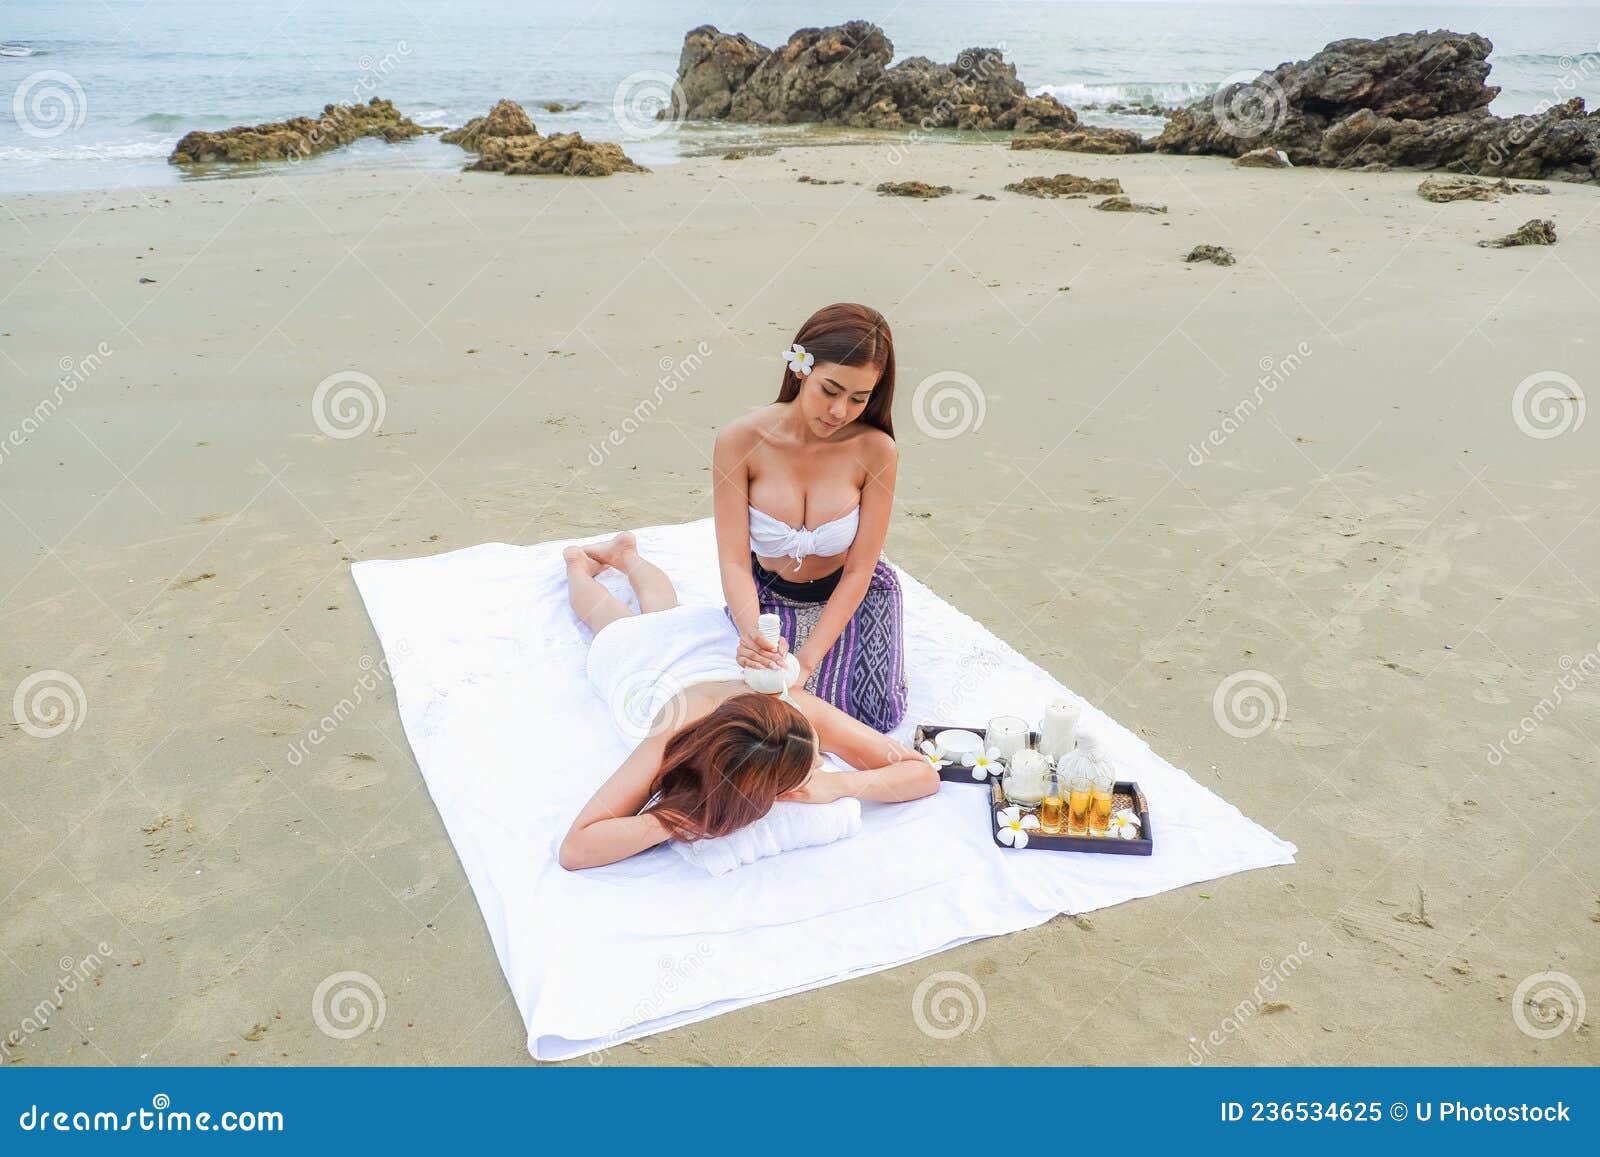 Two Asia Women Doing Spa Massage Together On The Tropical Beach Stock Image Image Of Back